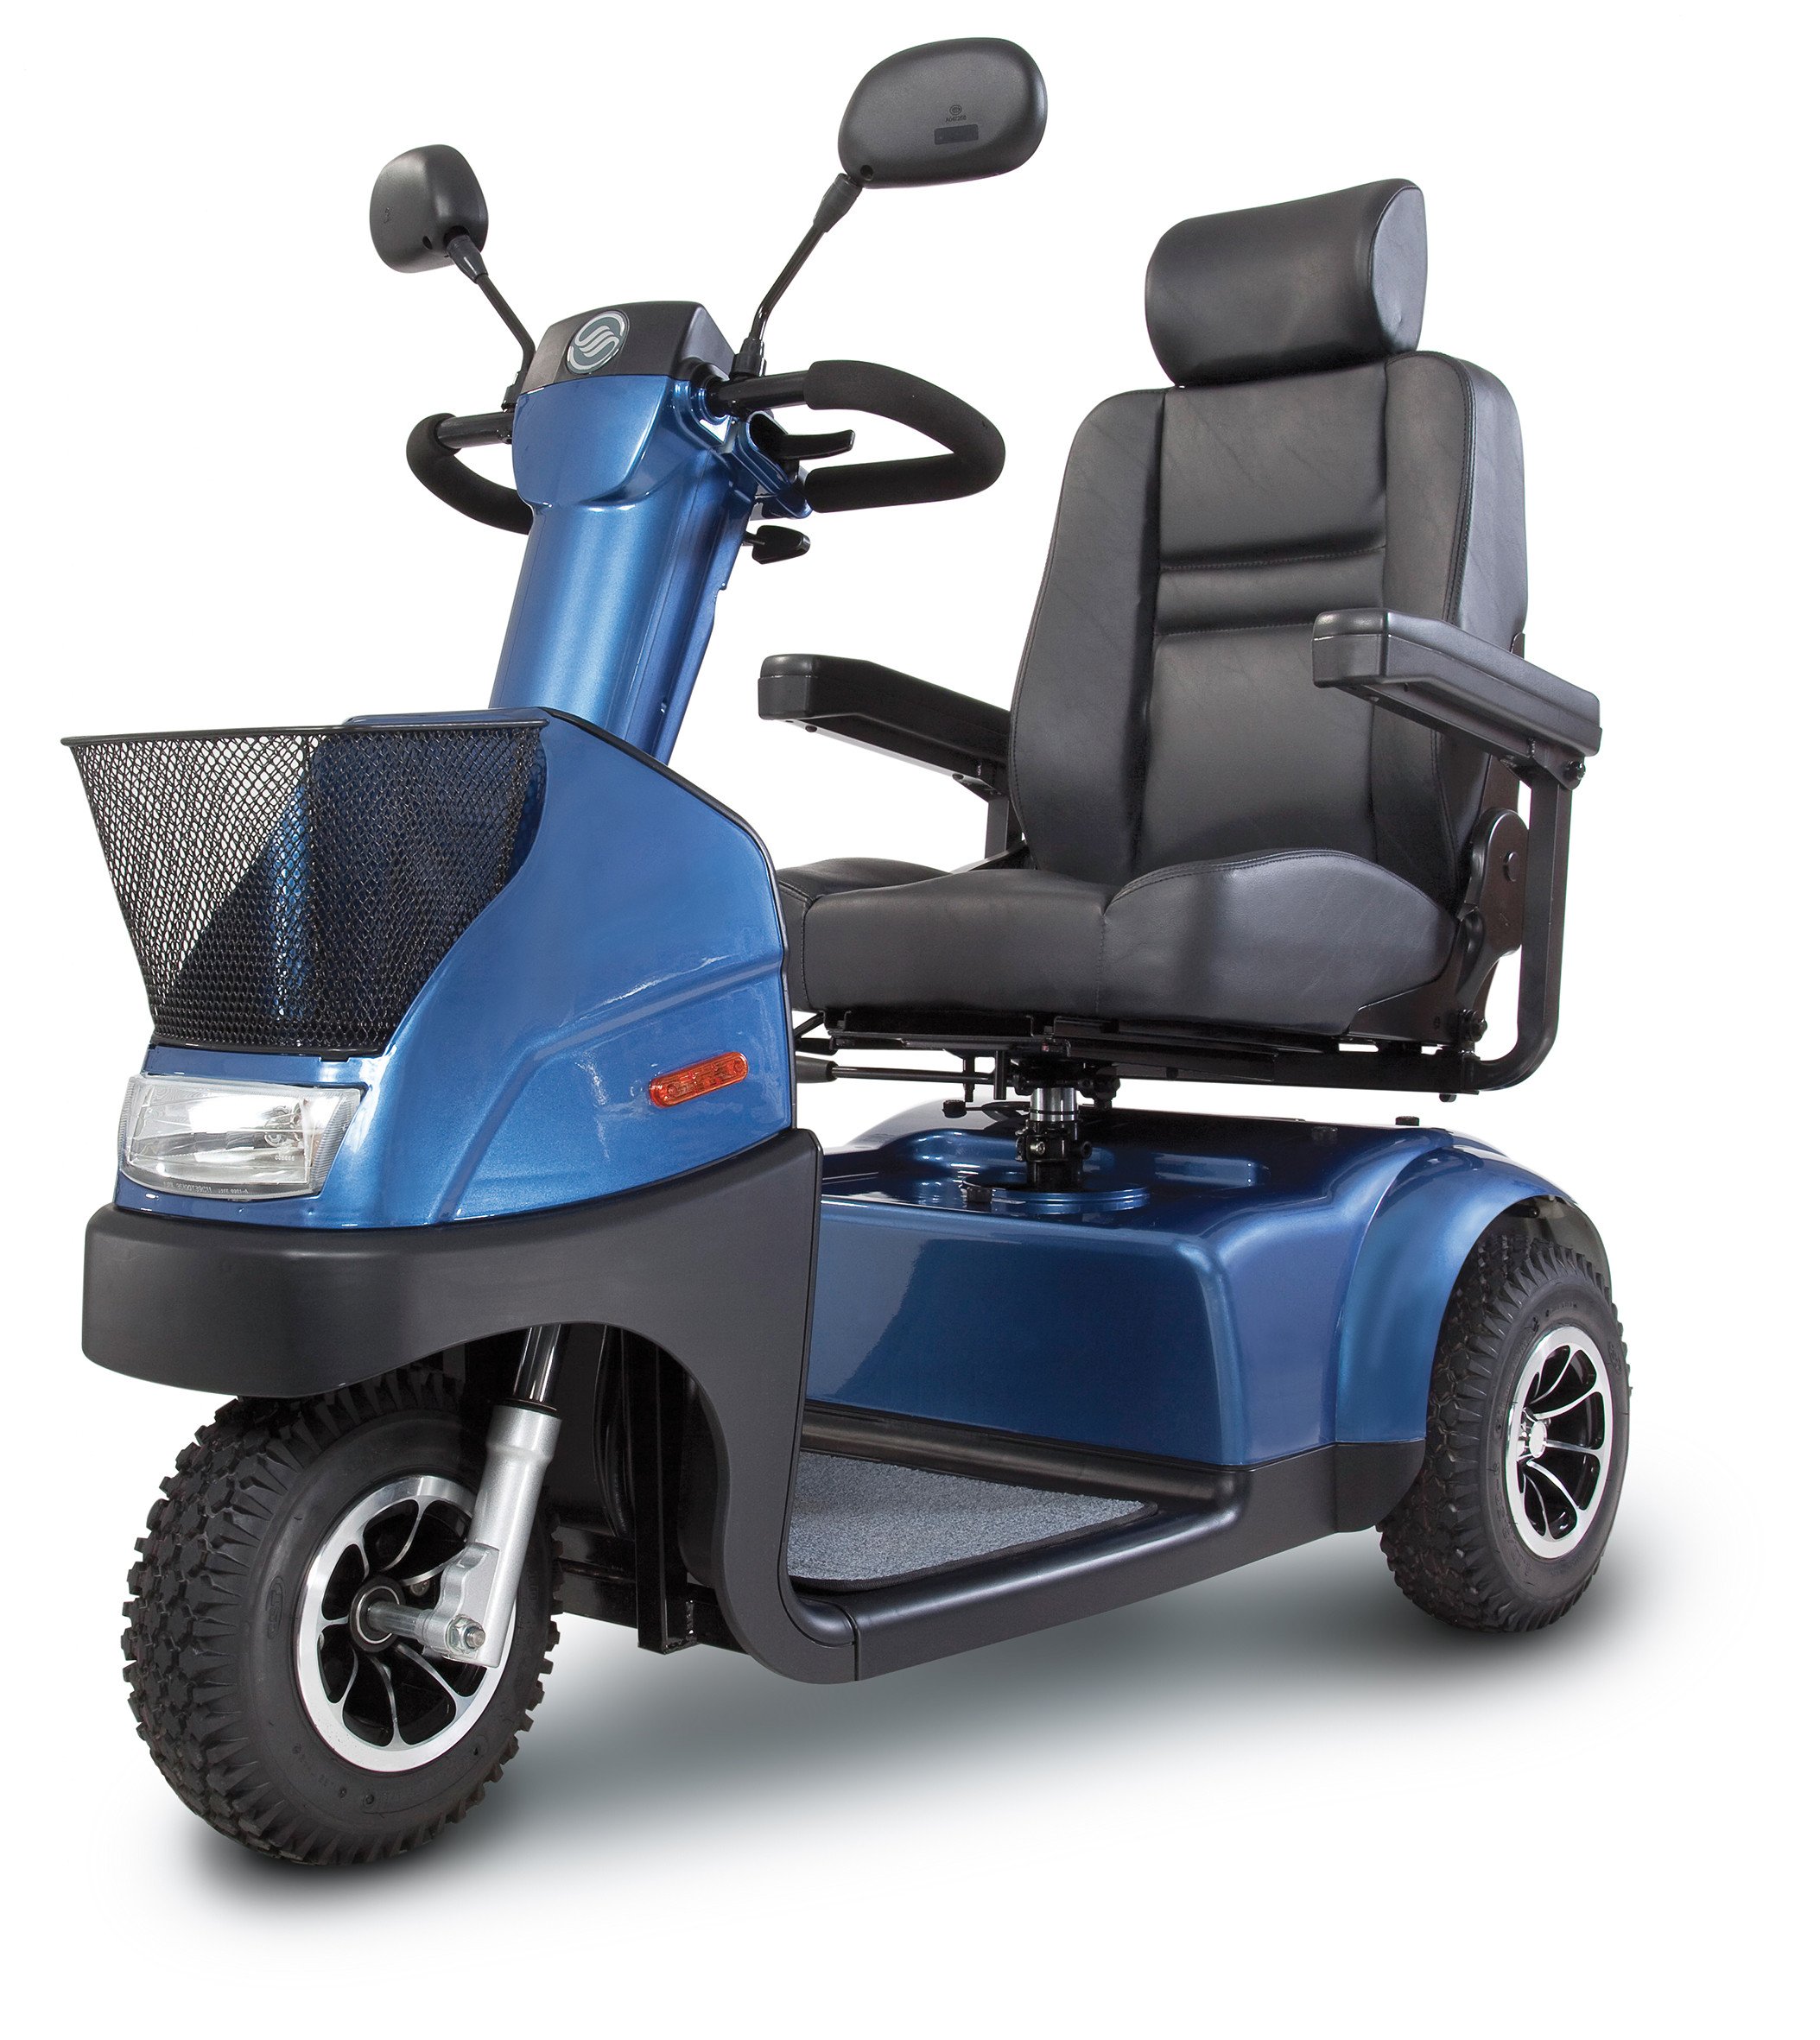 Afiscooter C3 3-Wheel Scooter - Blue